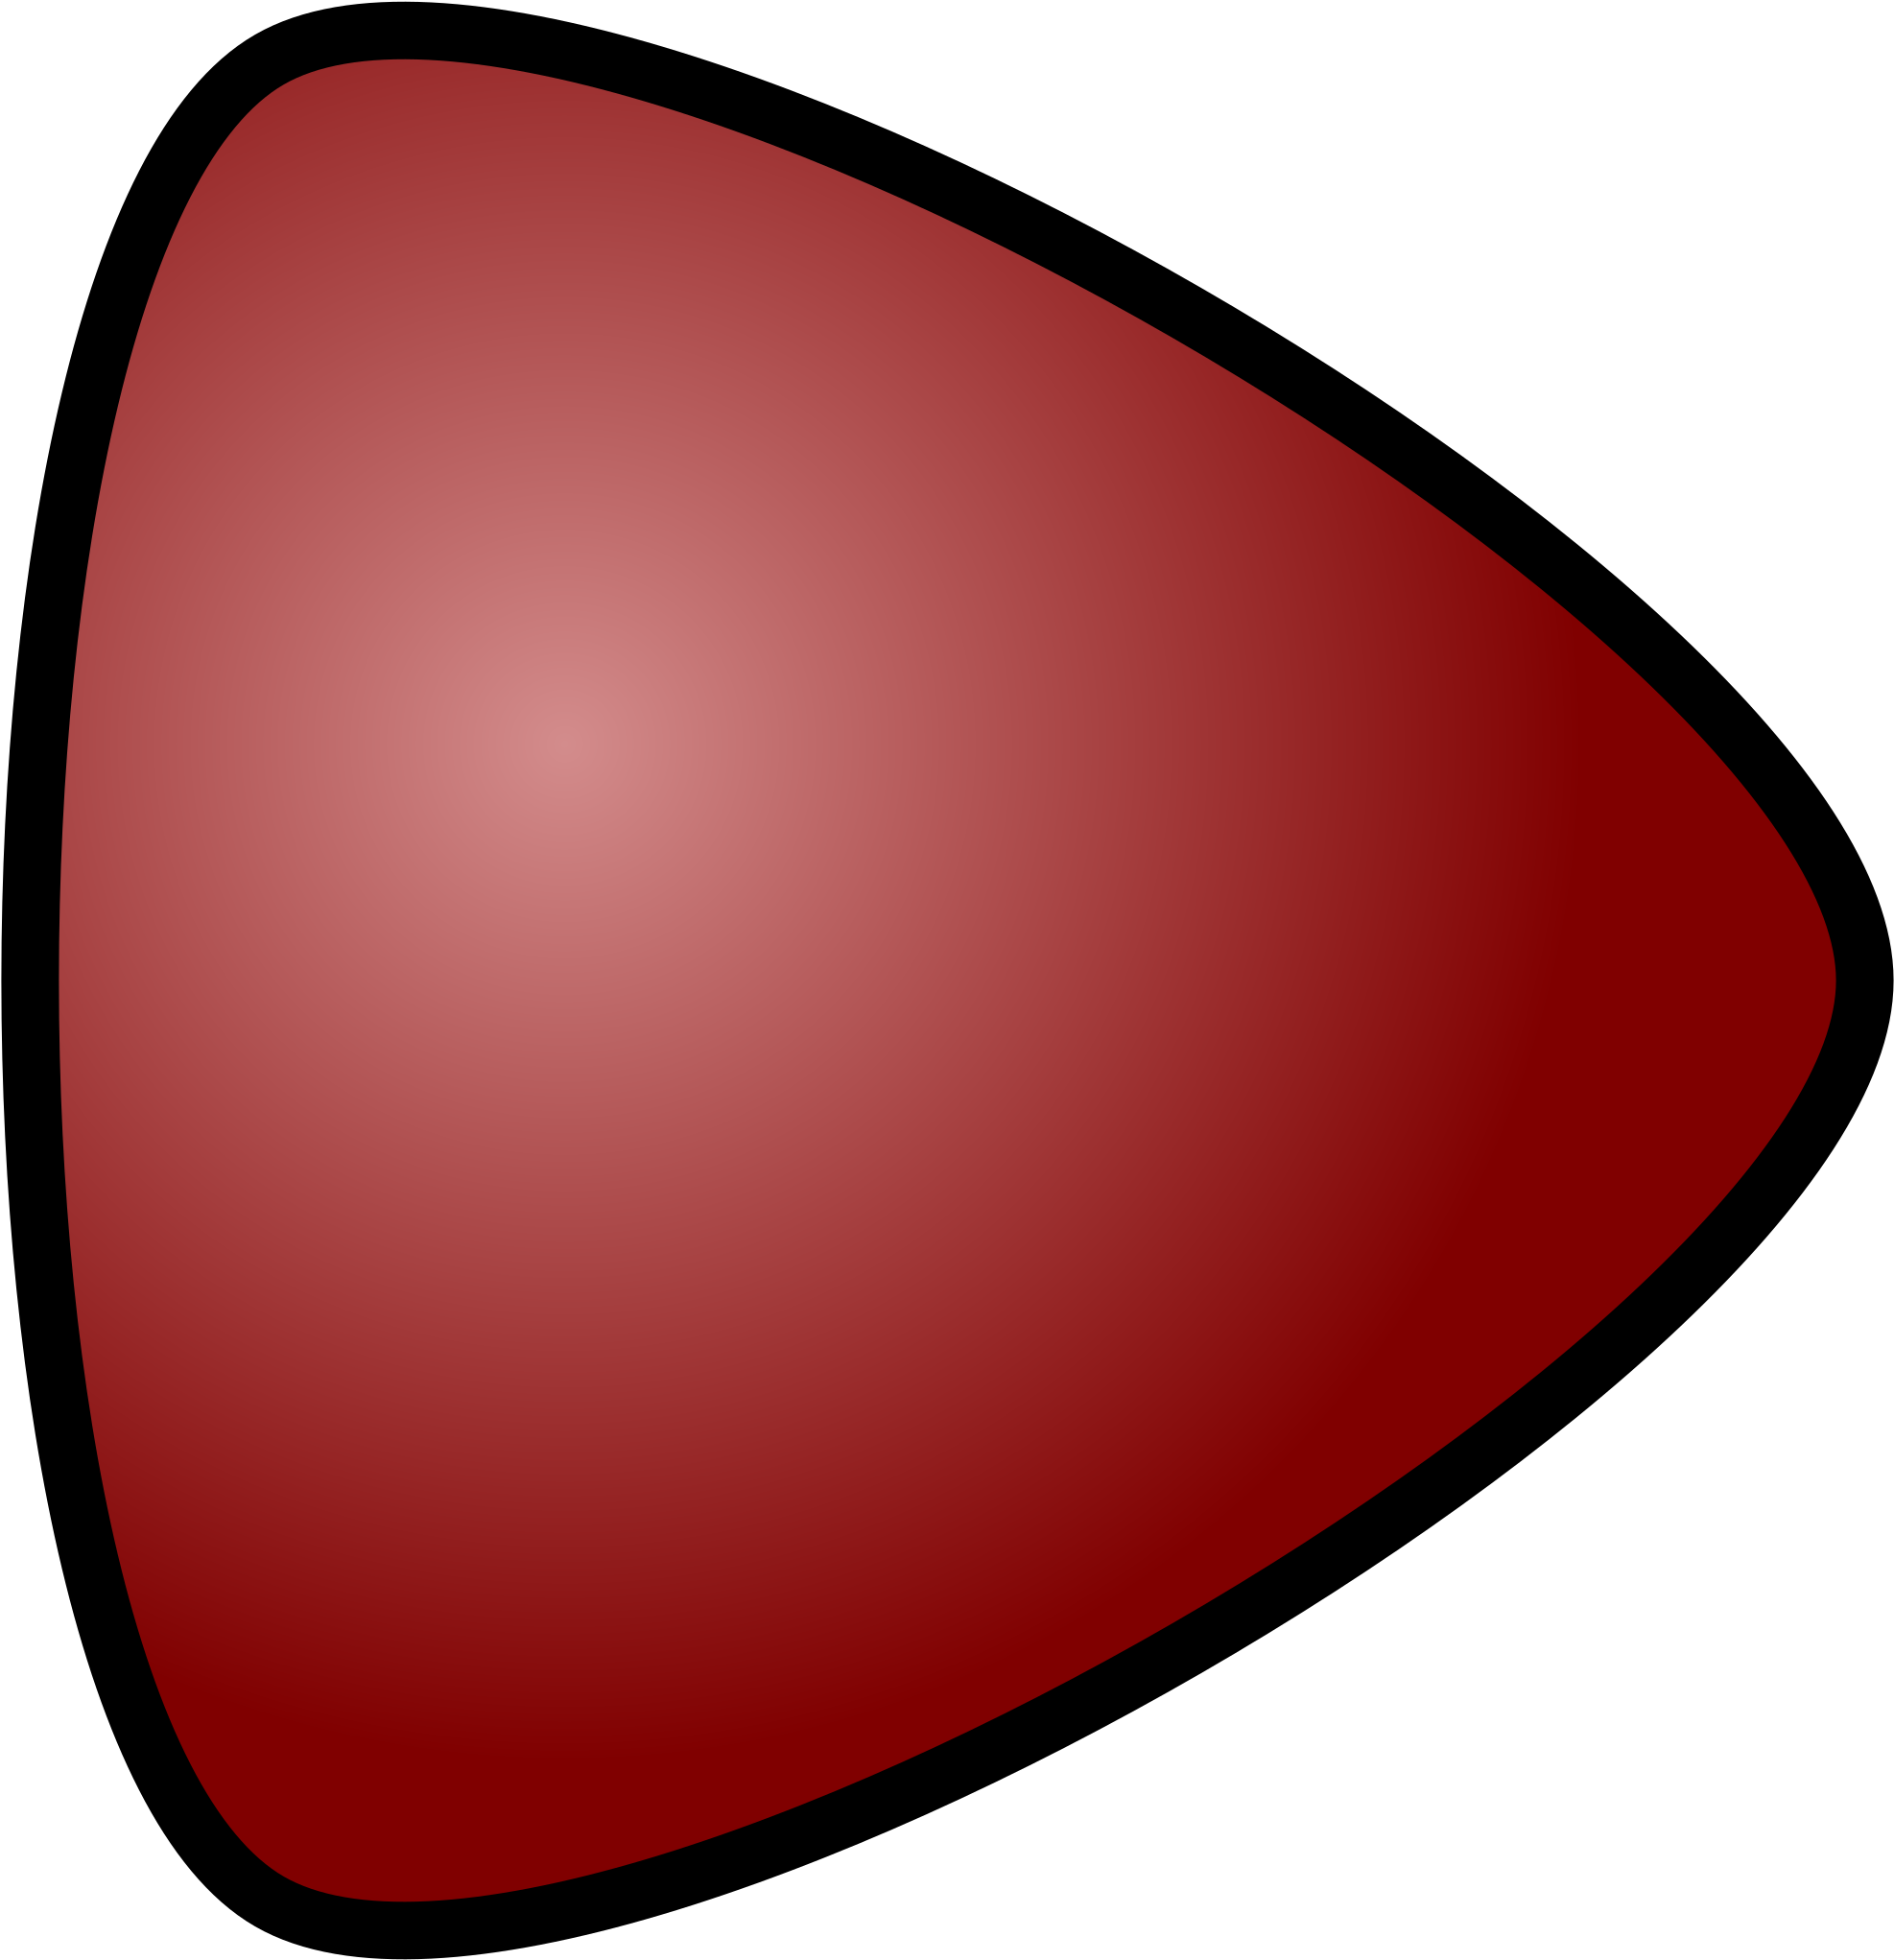 Play Button, Red, For Media Player - Portable Network Graphics (2400x2400)